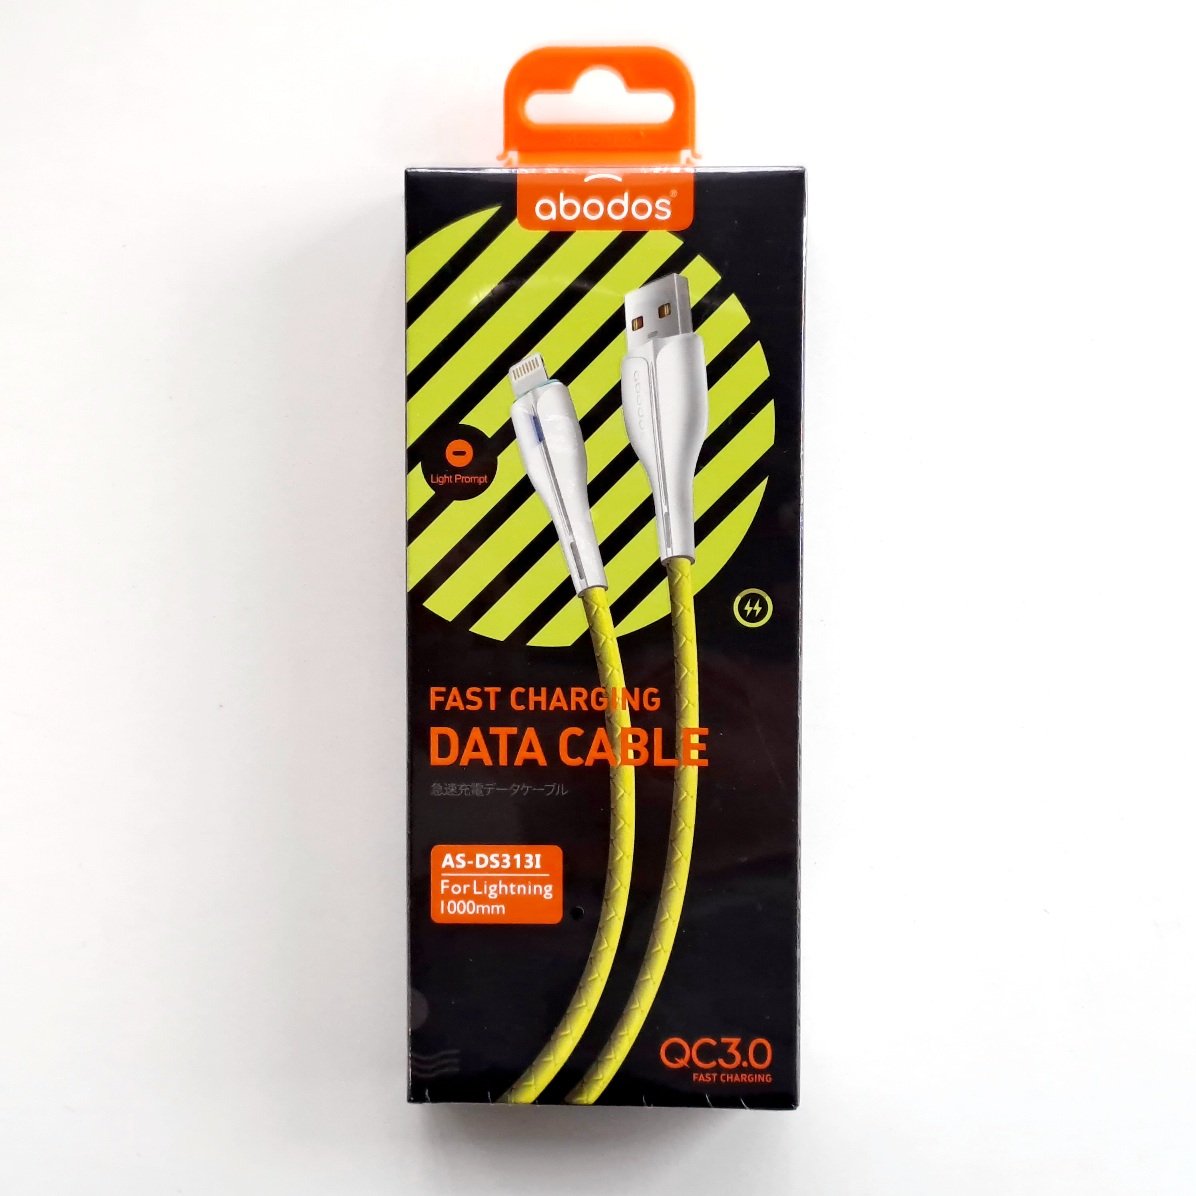 AS-DS313i abodos LED QC3.0 USB to Lightning Data Cable 1m